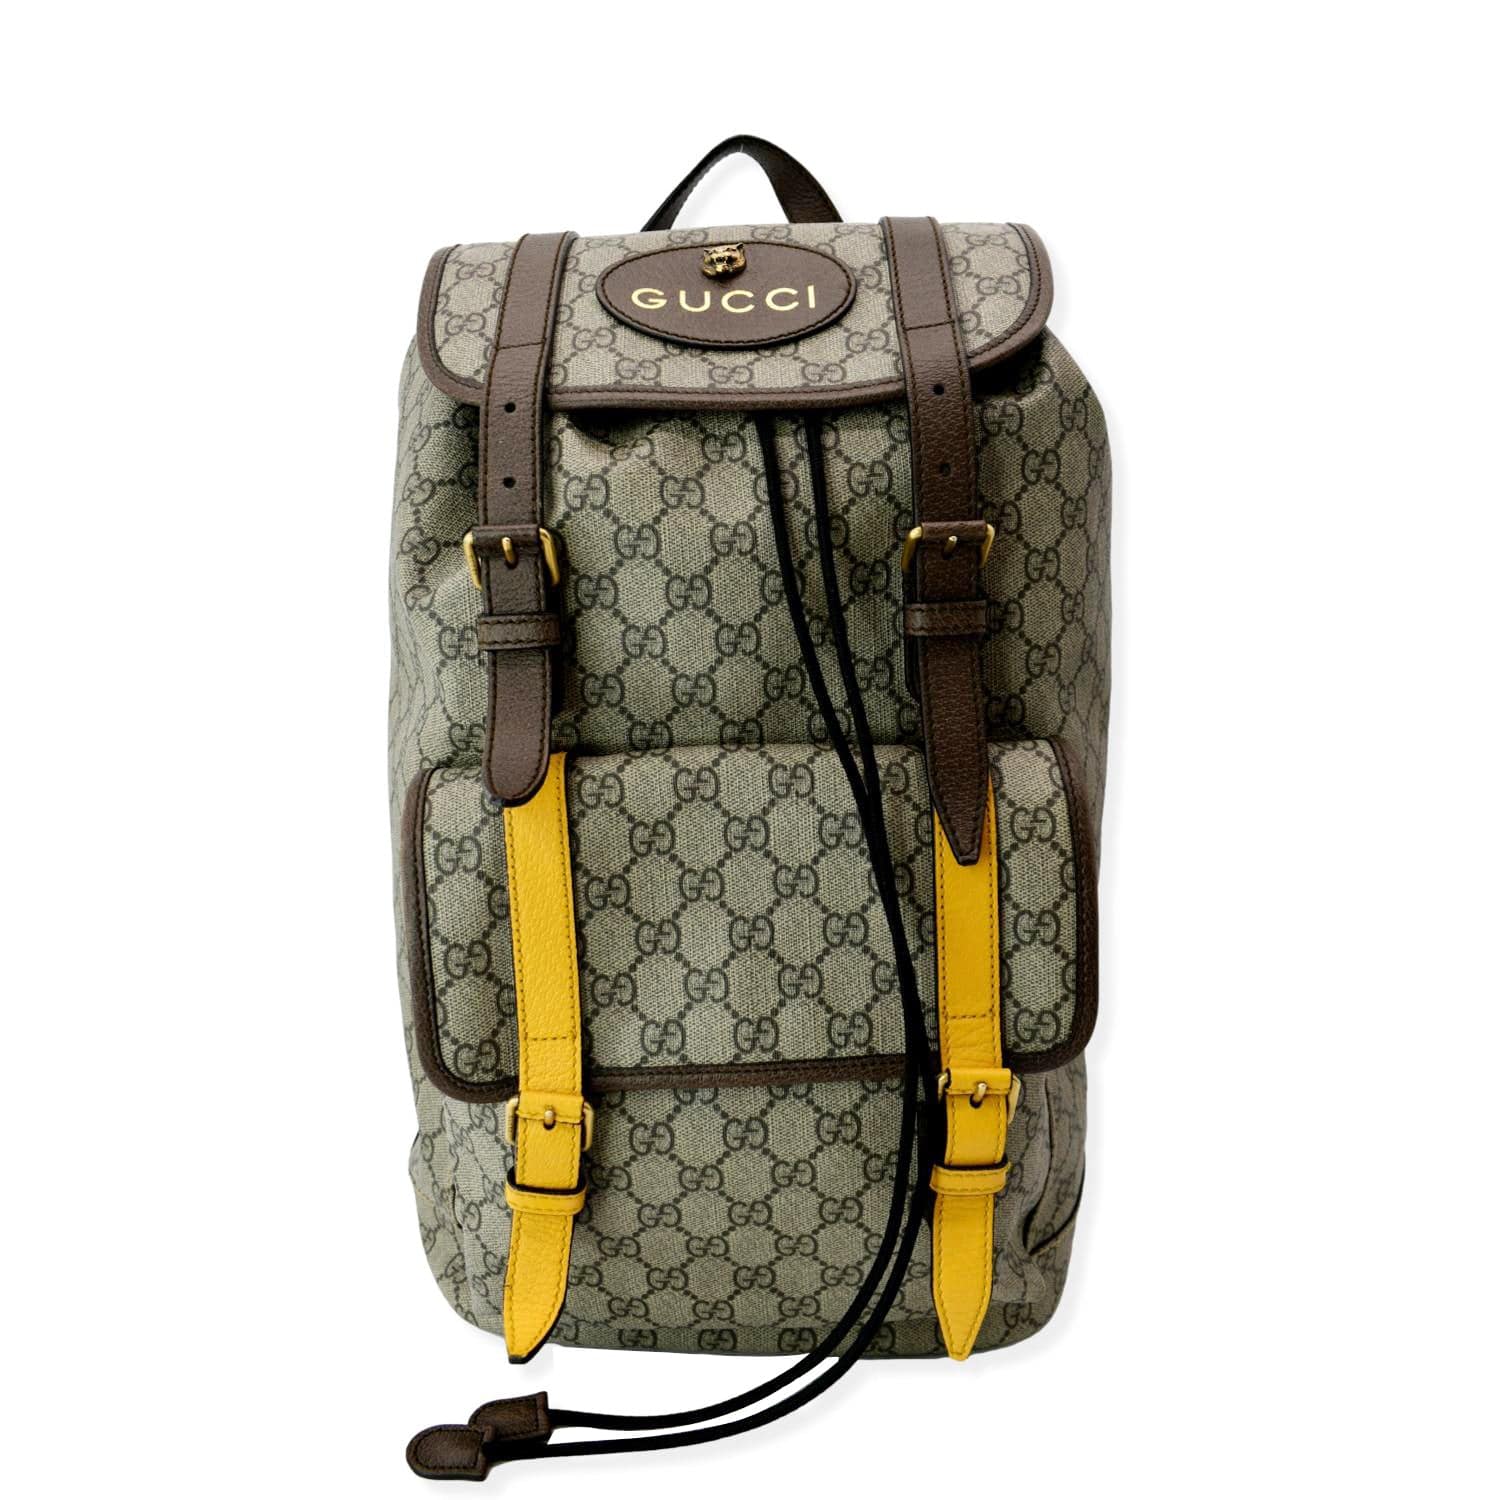 Buy Gucci Gucci GG Supreme Canvas Backpack Online